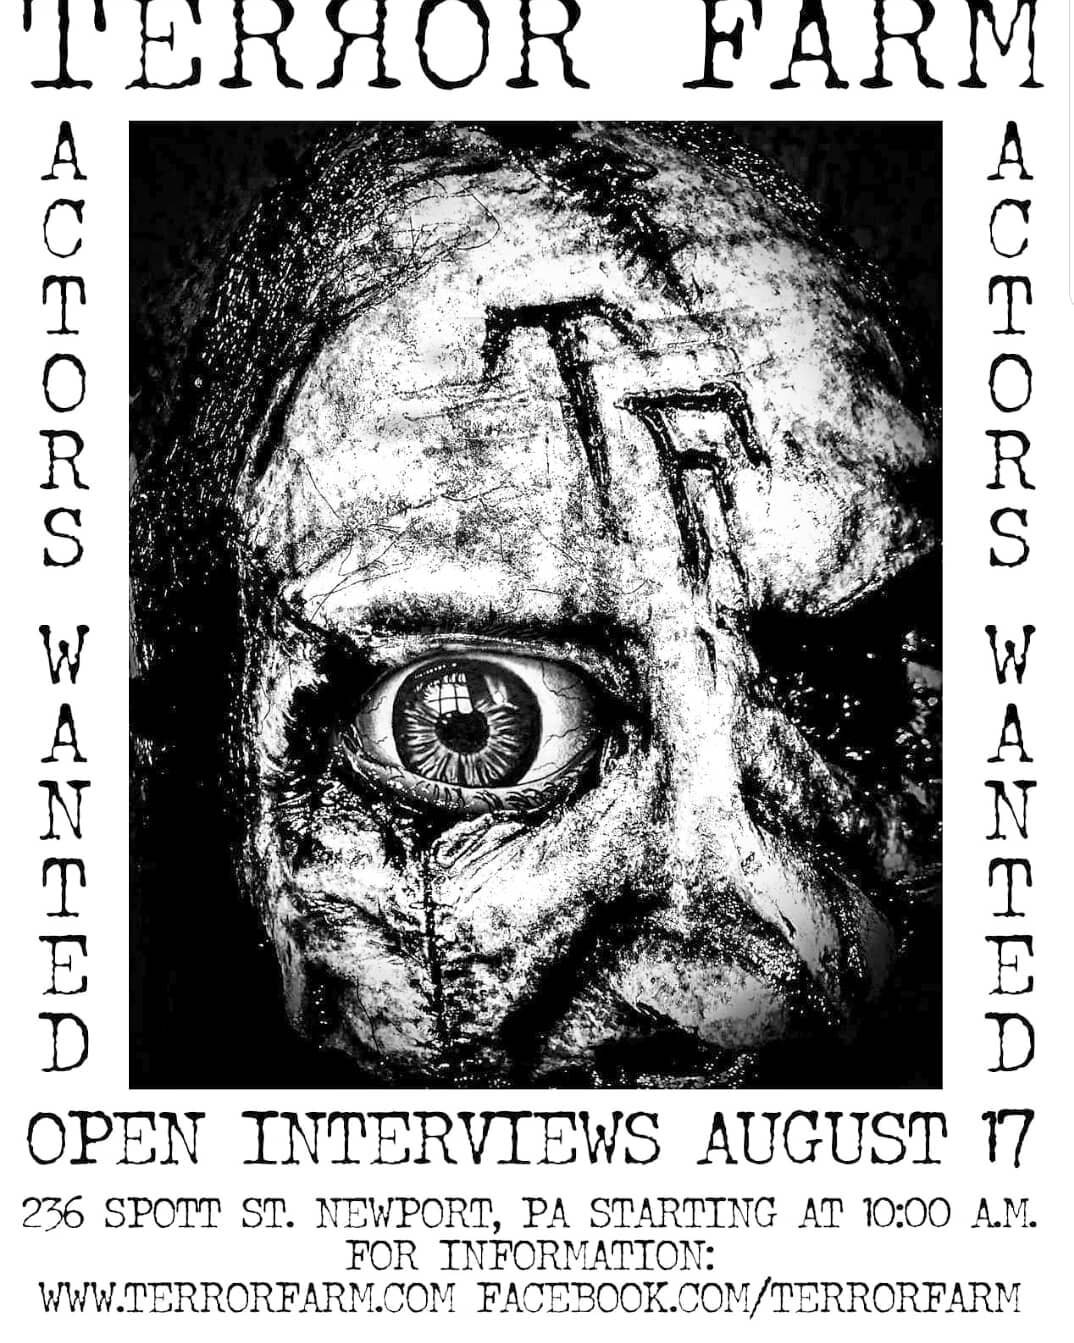 Actor interviews at the haunted house start Saturday August 17 at 10 am!  Come check us out!  #terrorfarm #hauntedhouse #haunt #newport #pennsylvania #perrycounty #terror #farm #scary #halloween #acting #act #spooky #ghost #monster #killer #cannibal 